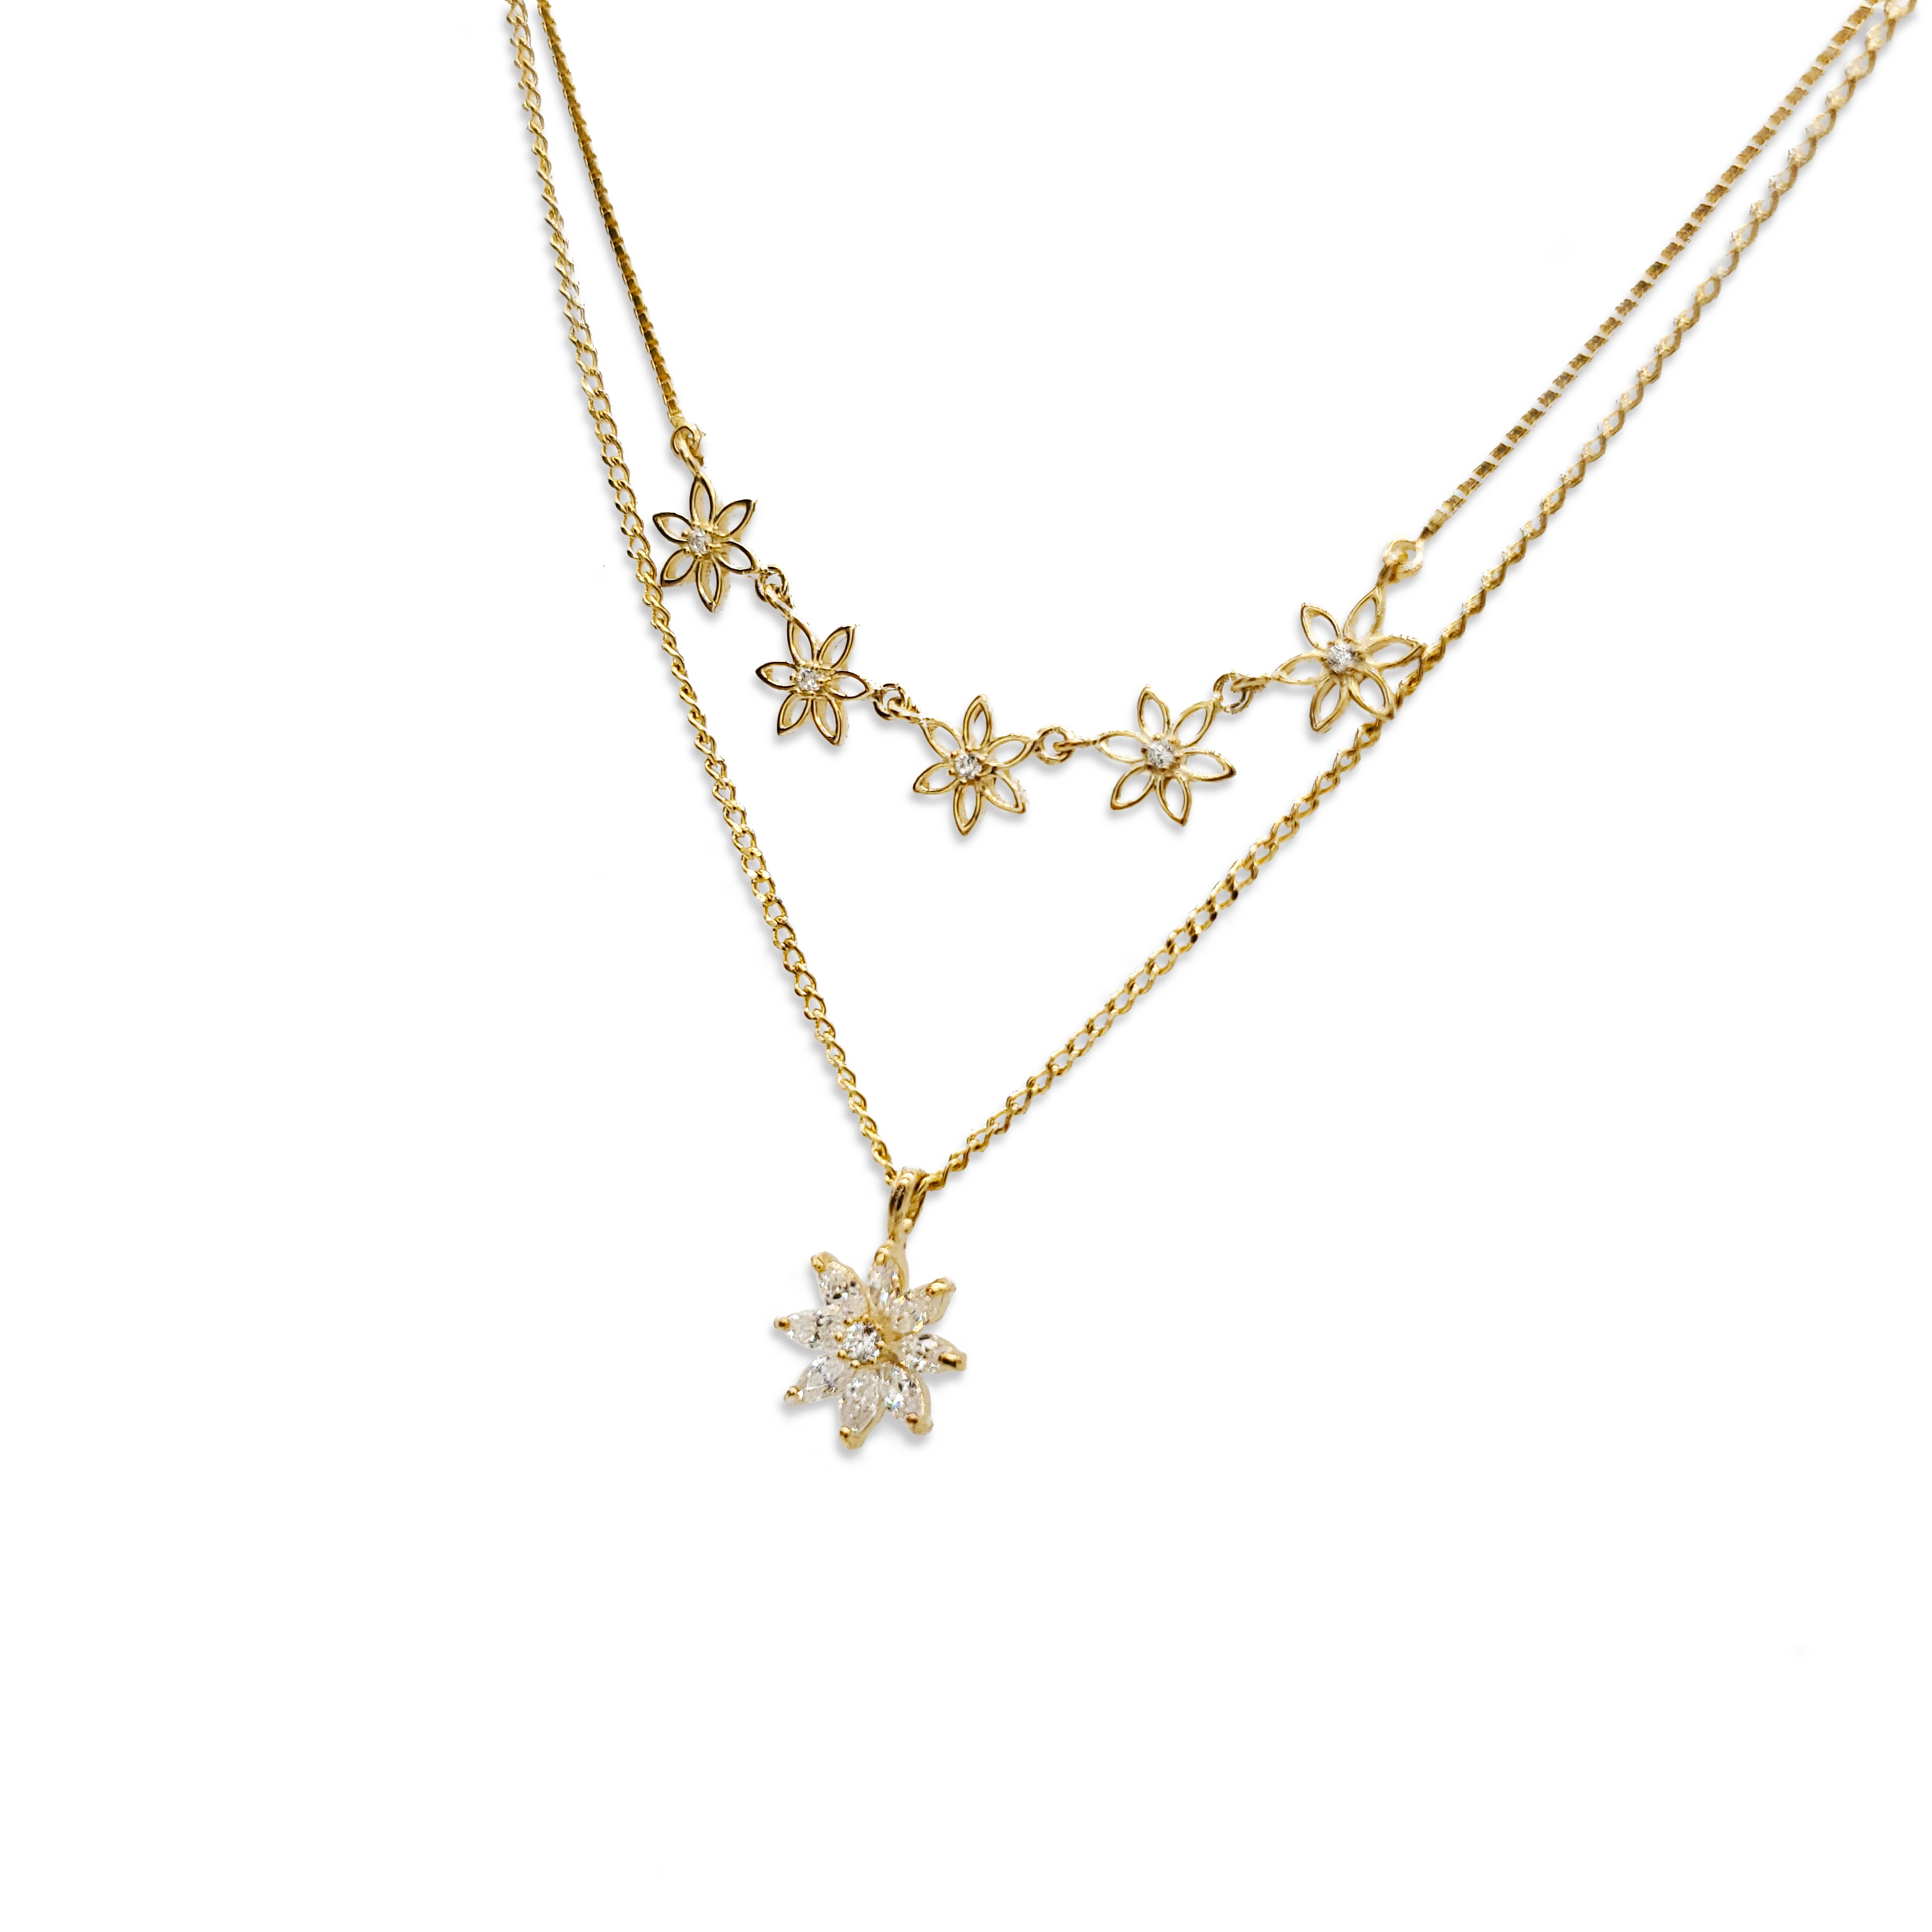 Double Strands Beautiful Gold Plated Cz Flower Design Gold Chains Necklace